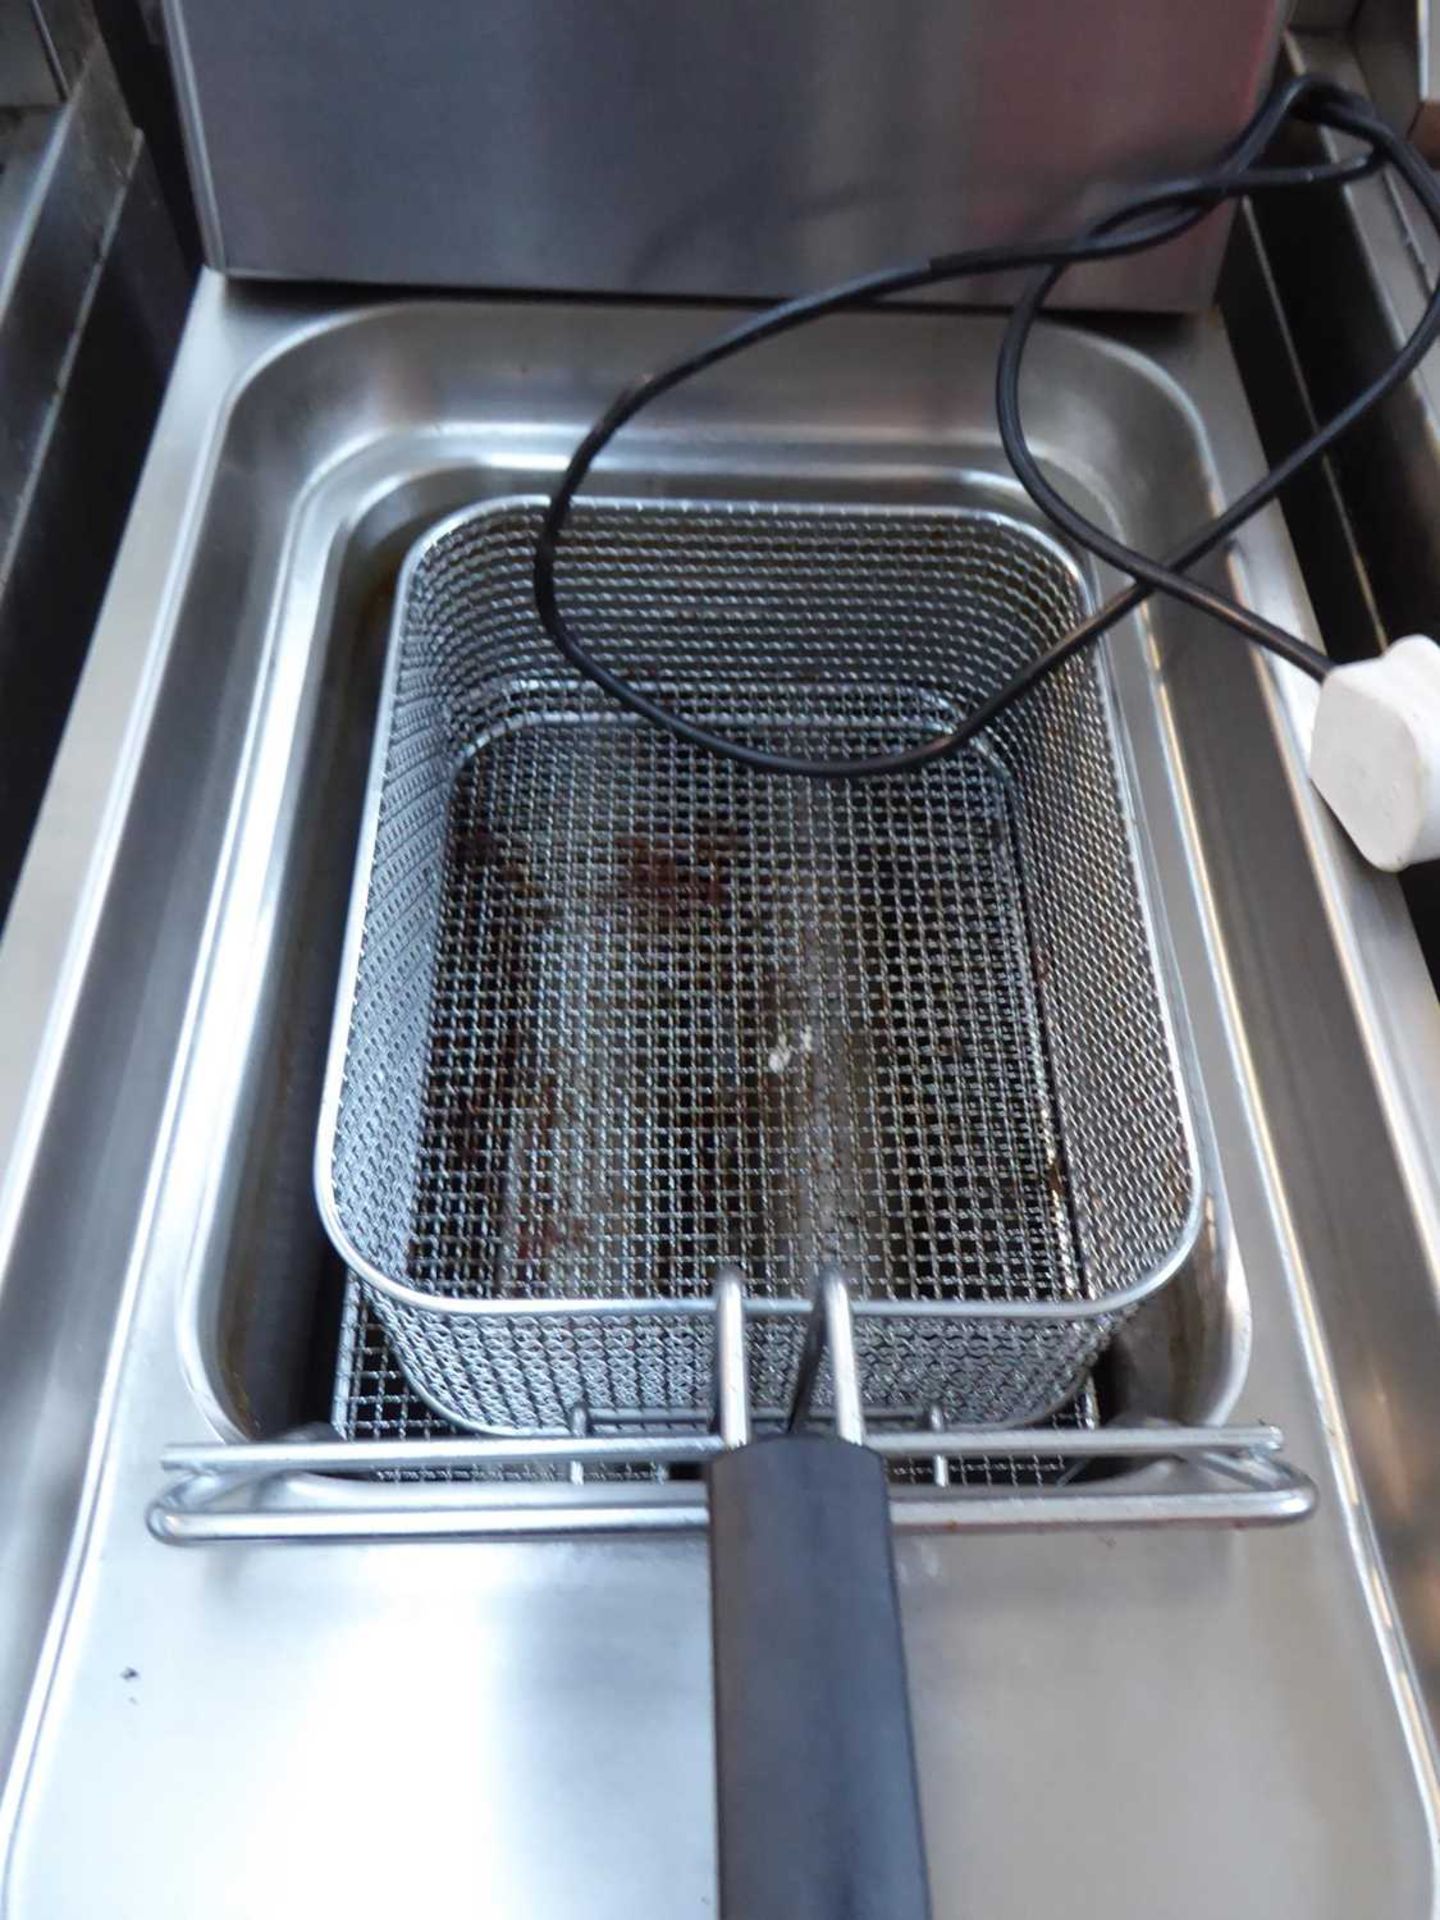 35cm electric Angelo Po single well fryer with basket - Image 2 of 2